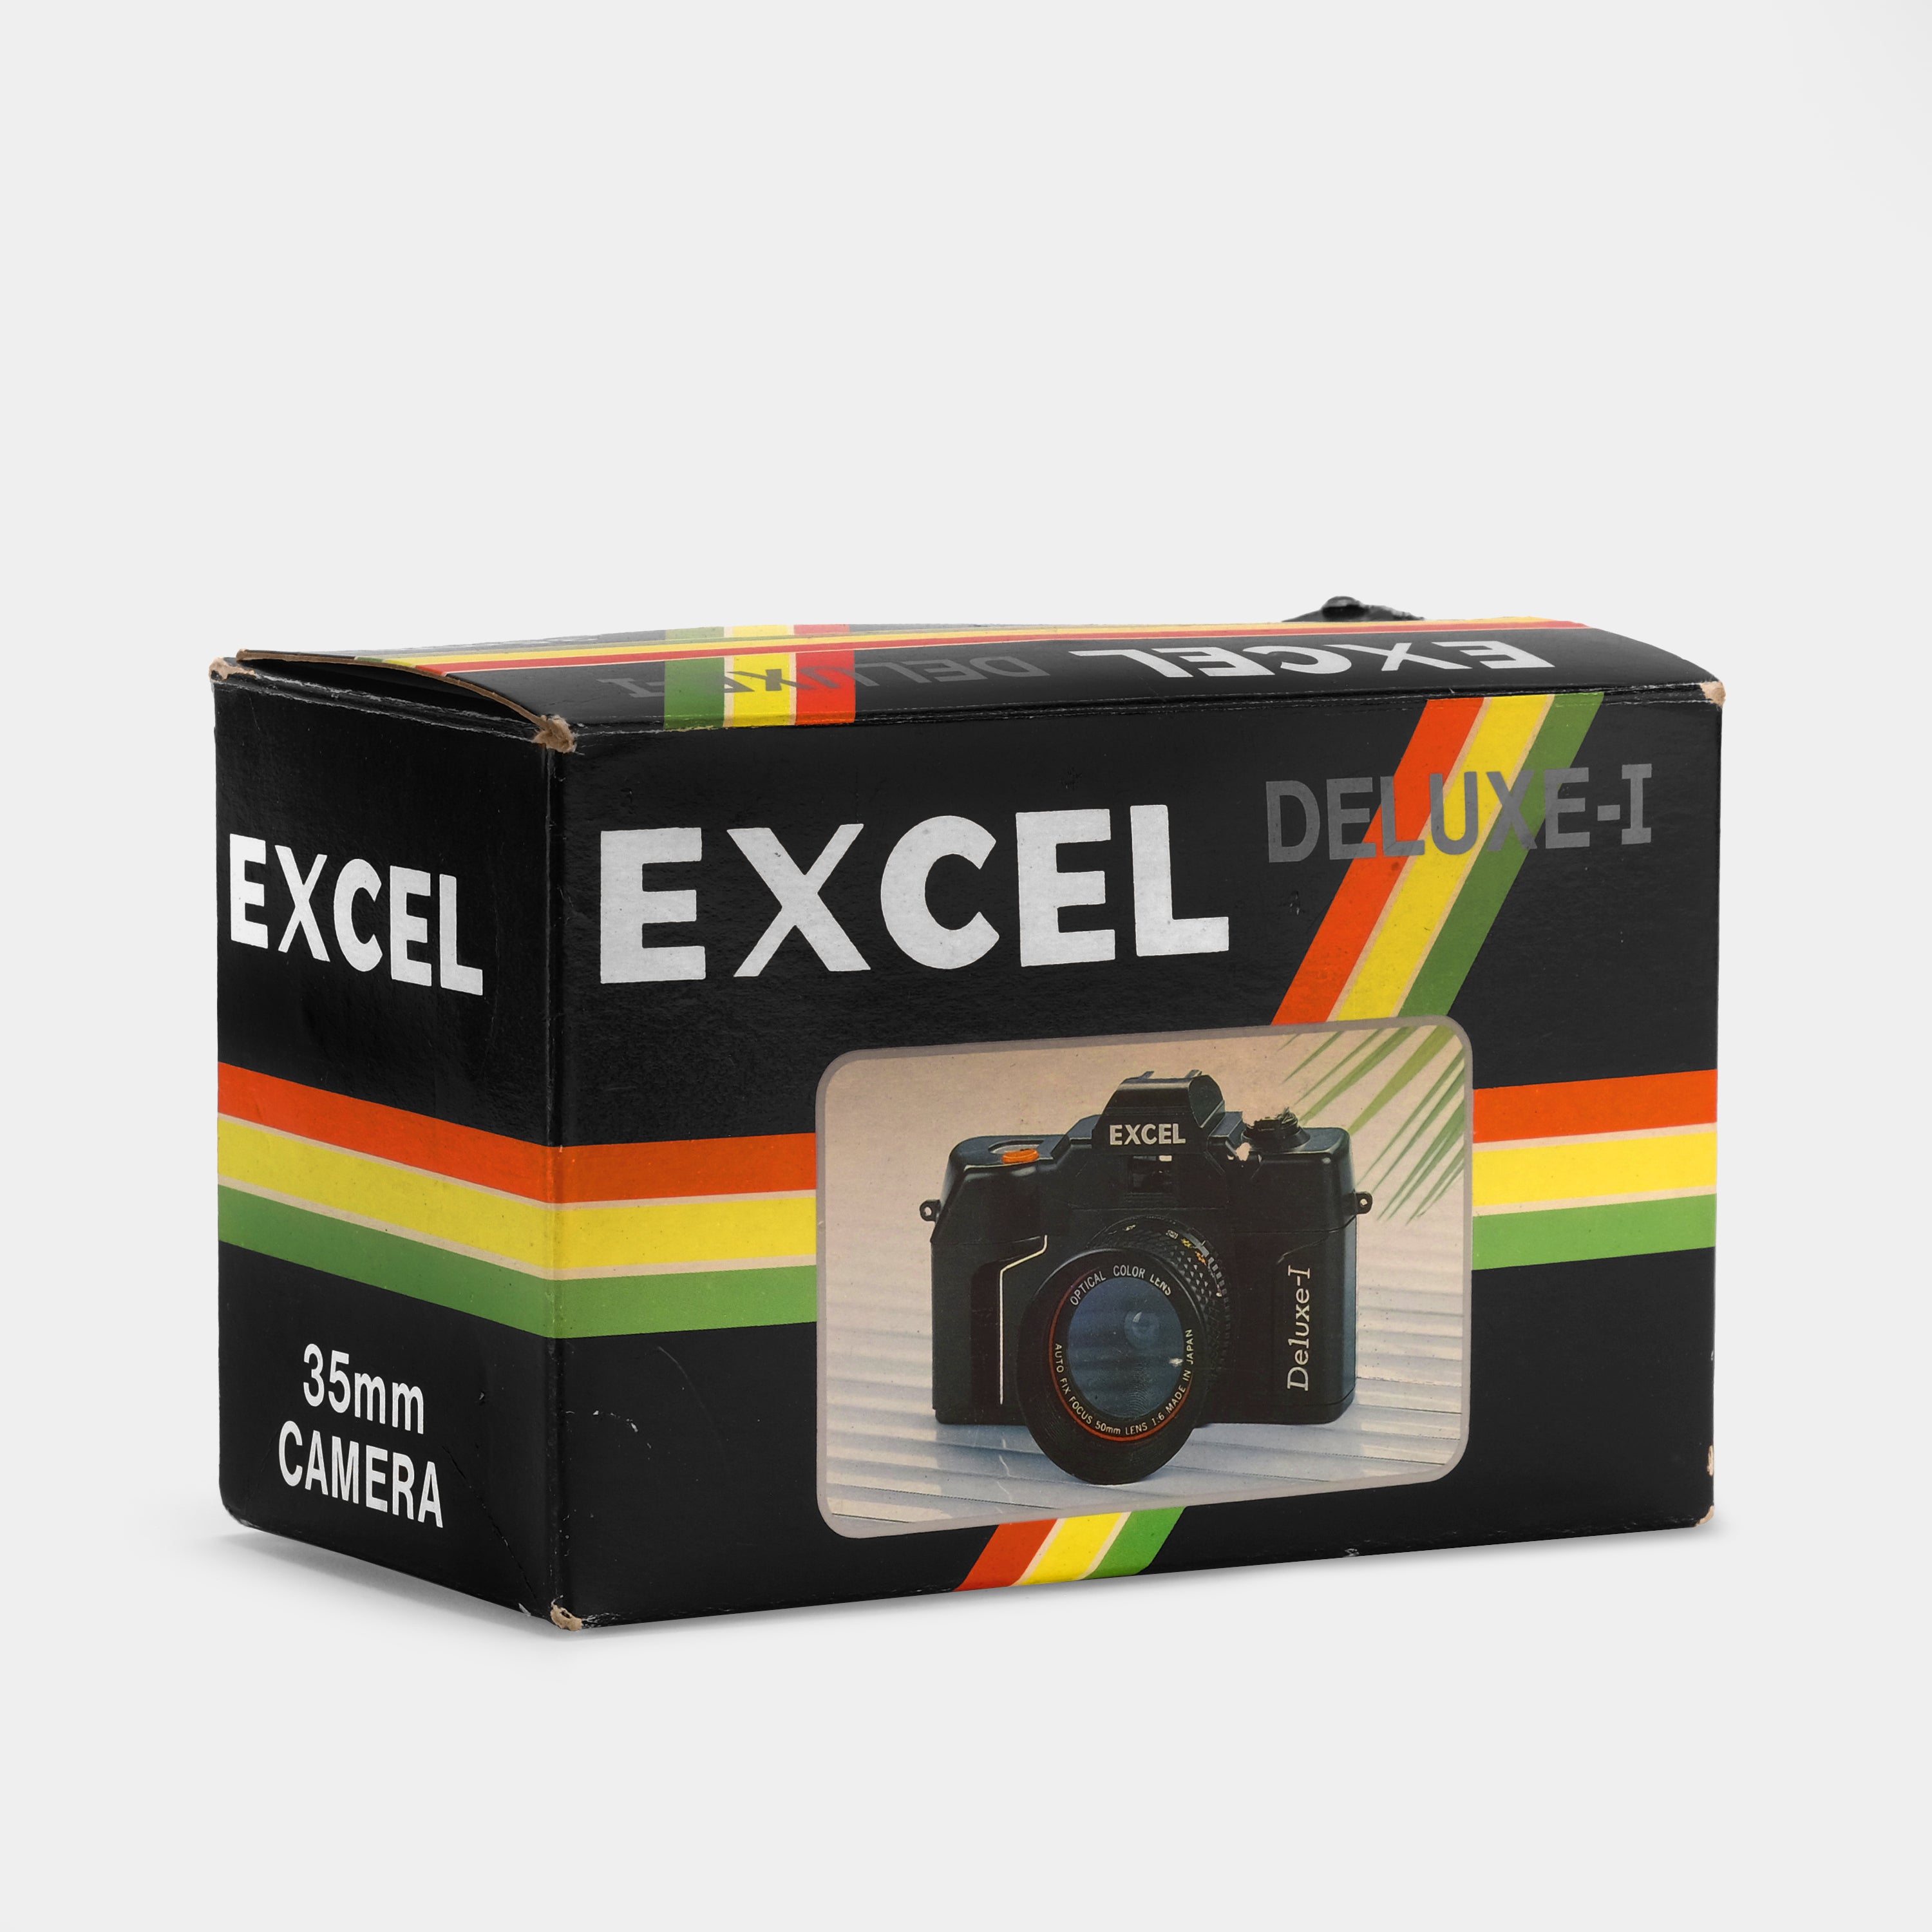 Excel Deluxe-I 35mm Point and Shoot Film Camera